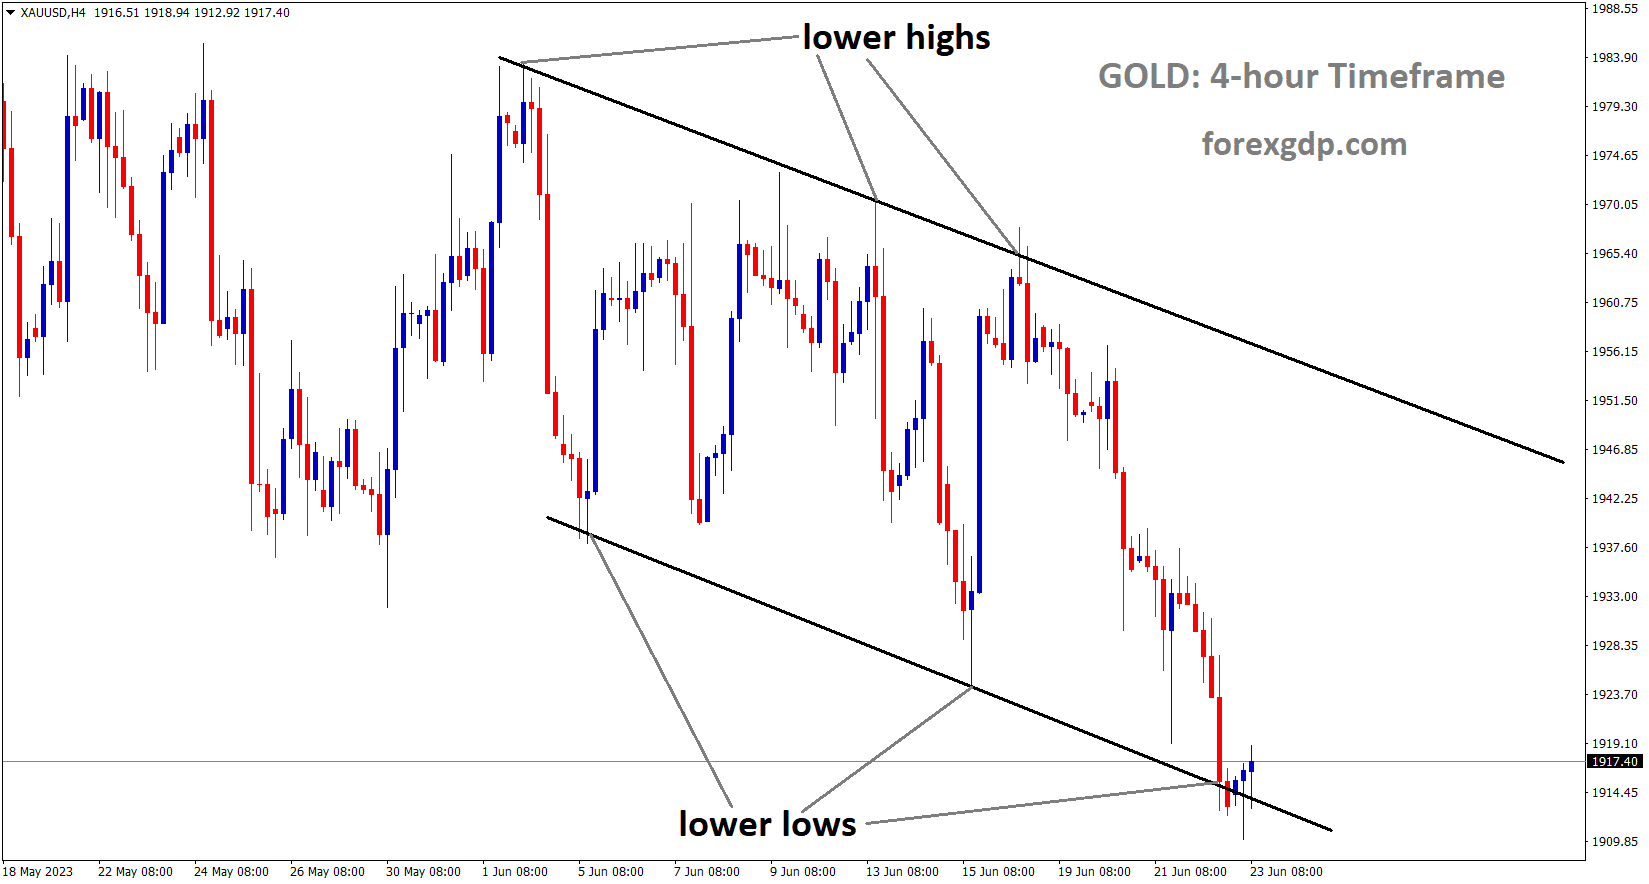 XAUUSD Gold Price is moving in the Descending channel and the market has reached the lower low area of the channel